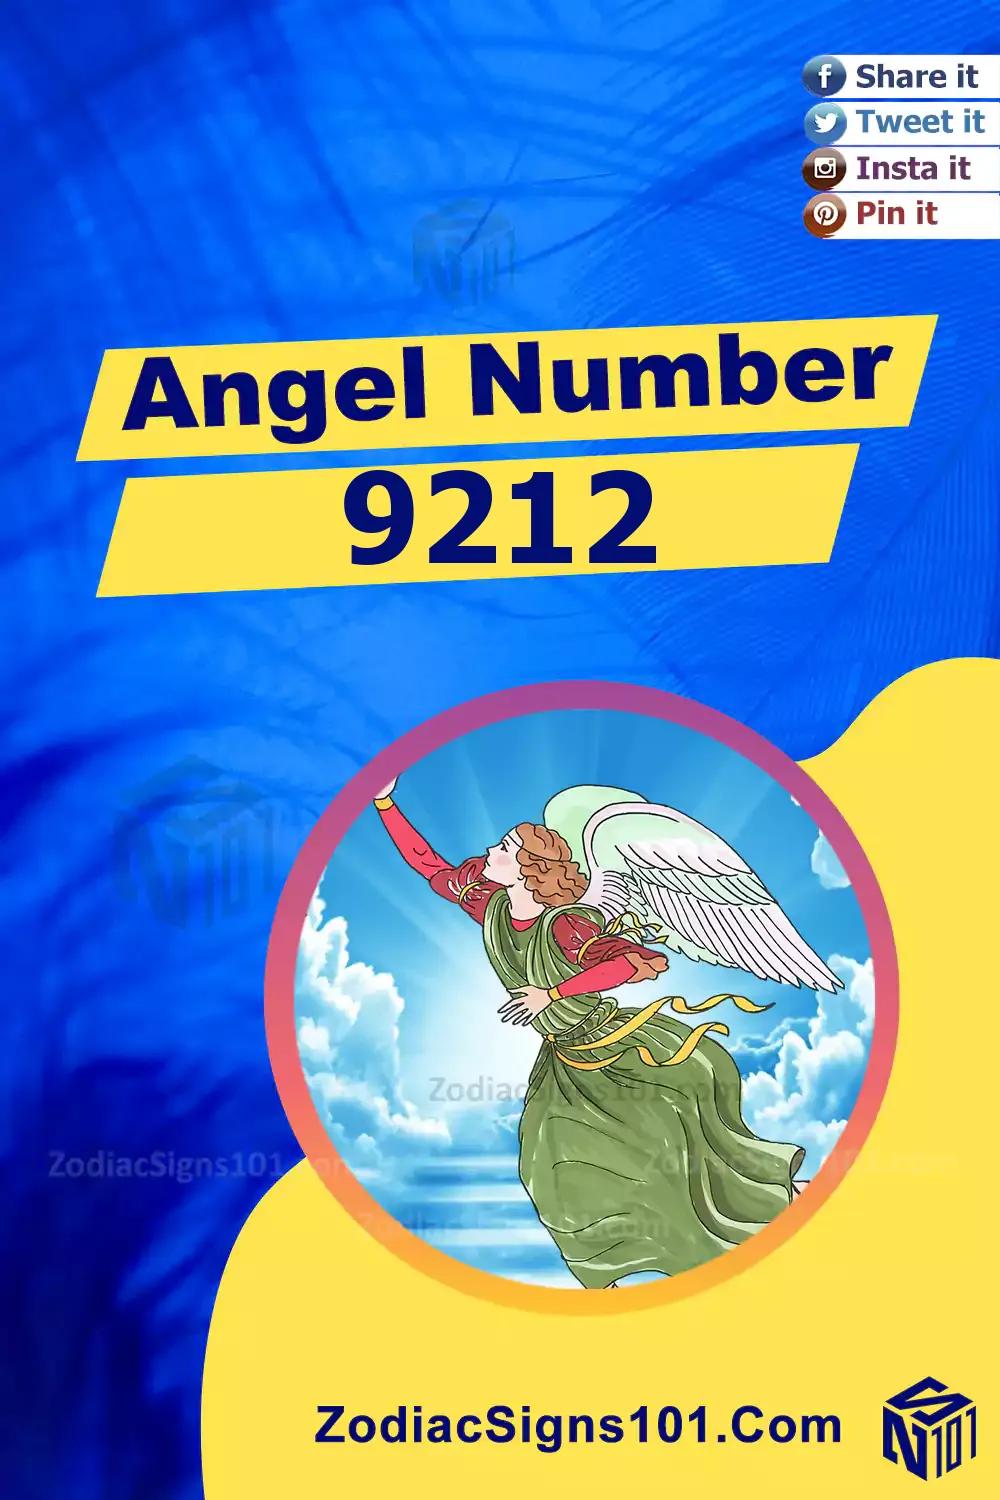 9212 Angel Number Meaning